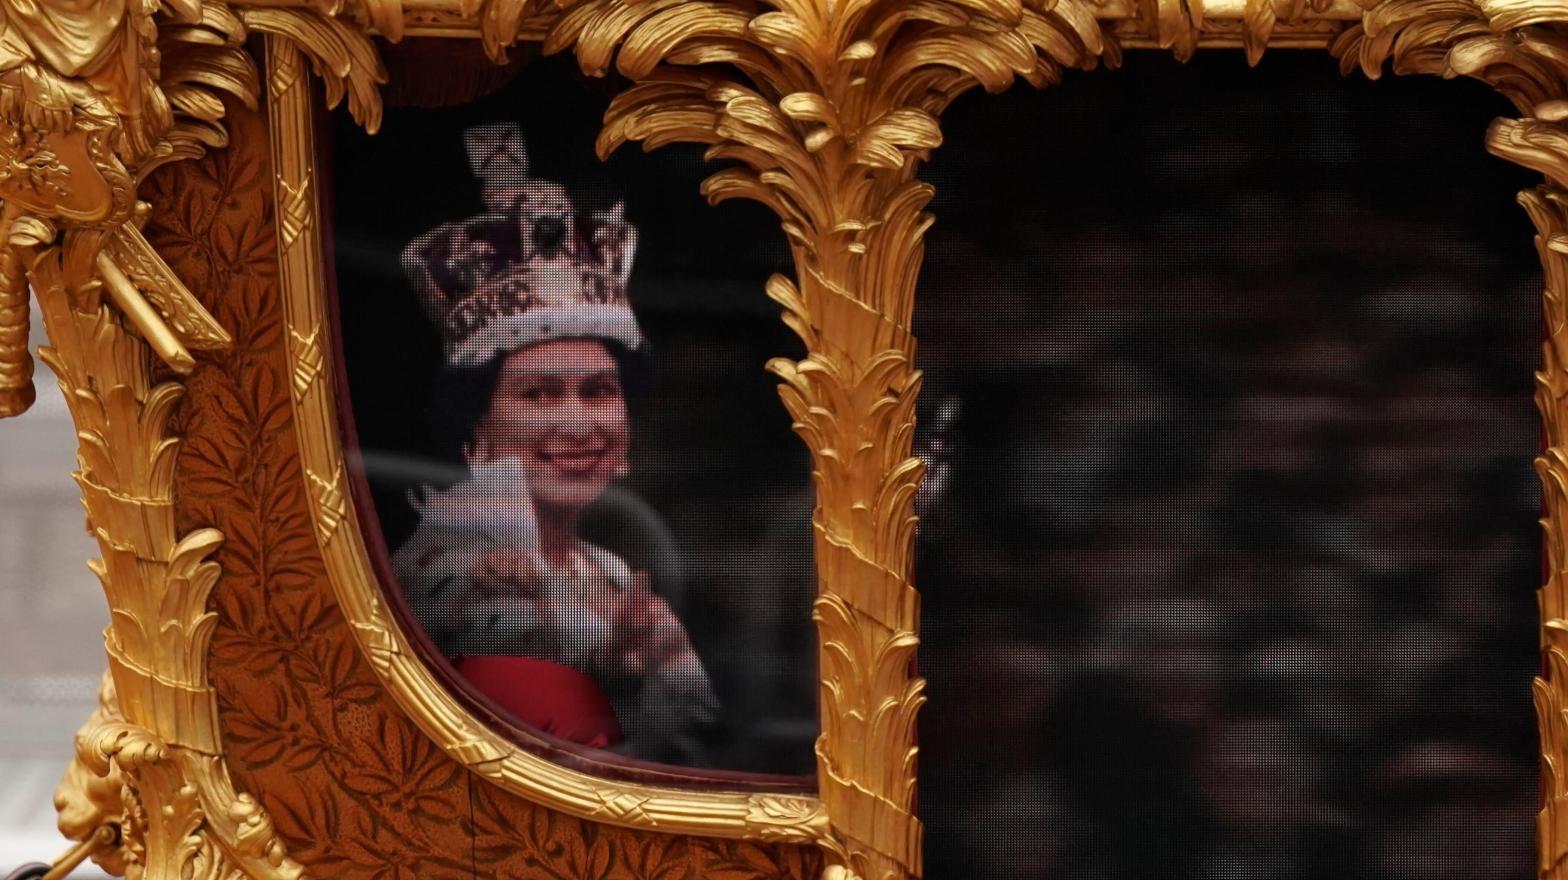 A visual display of Queen Elizabeth II during her coronation 1953 in the Gold State  Coach during the Platinum Jubilee Pageant outside Buckingham Palace in  London on June 5, 2022 (Photo: Aaron Chown, AP)